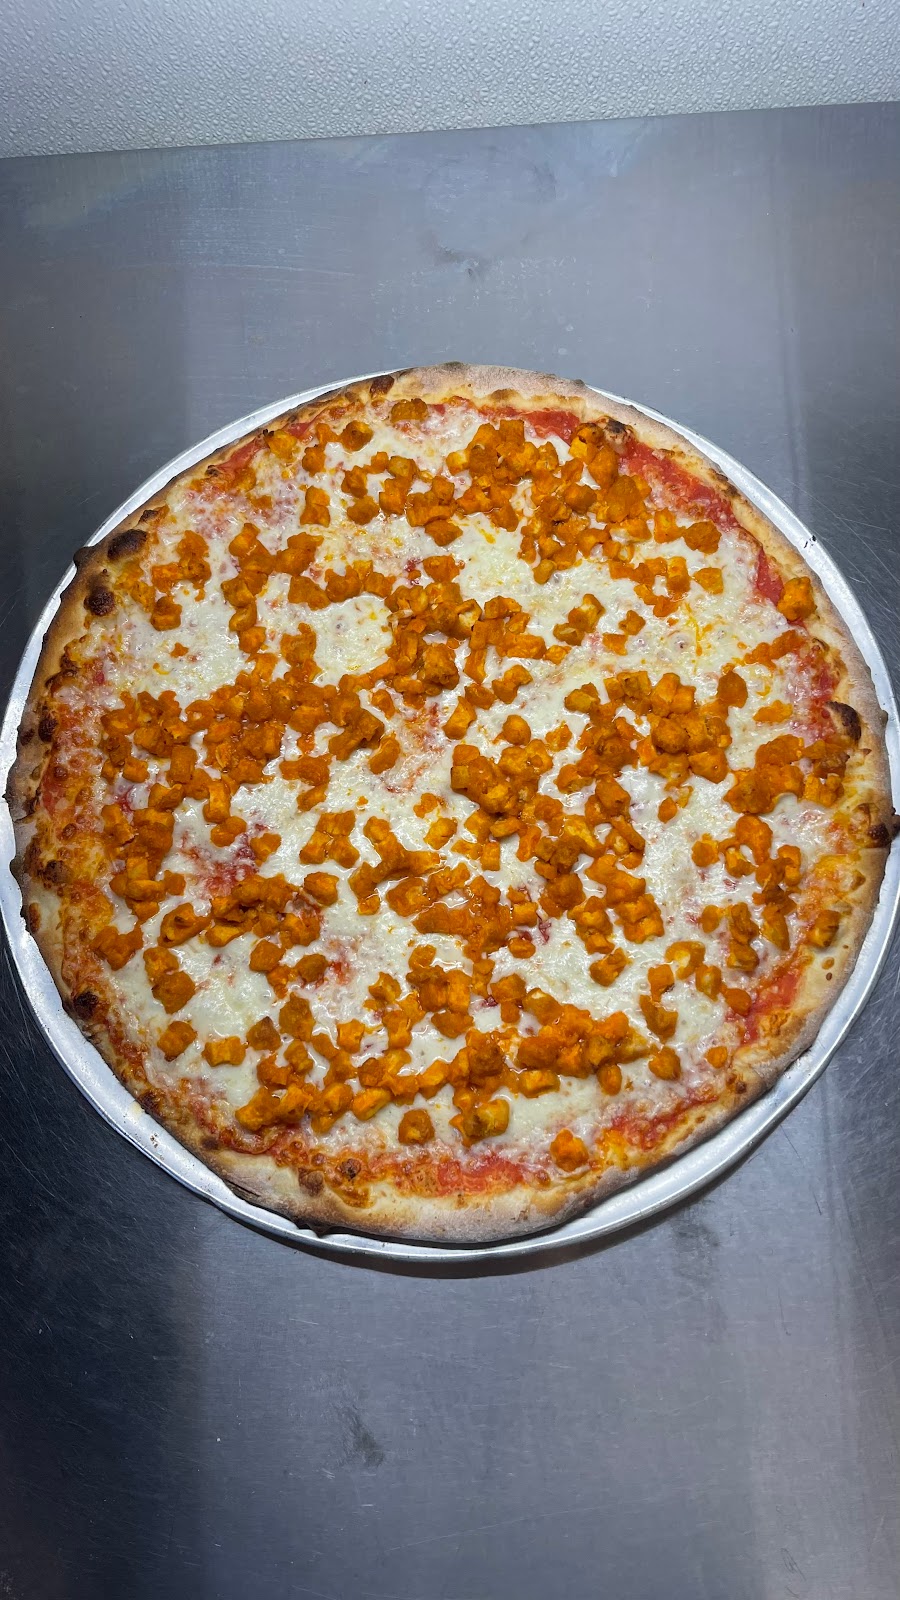 Andys Pizza Restaurant | 38 Saw Mill Rd Suite# 12, West Haven, CT 06516 | Phone: (203) 932-0022